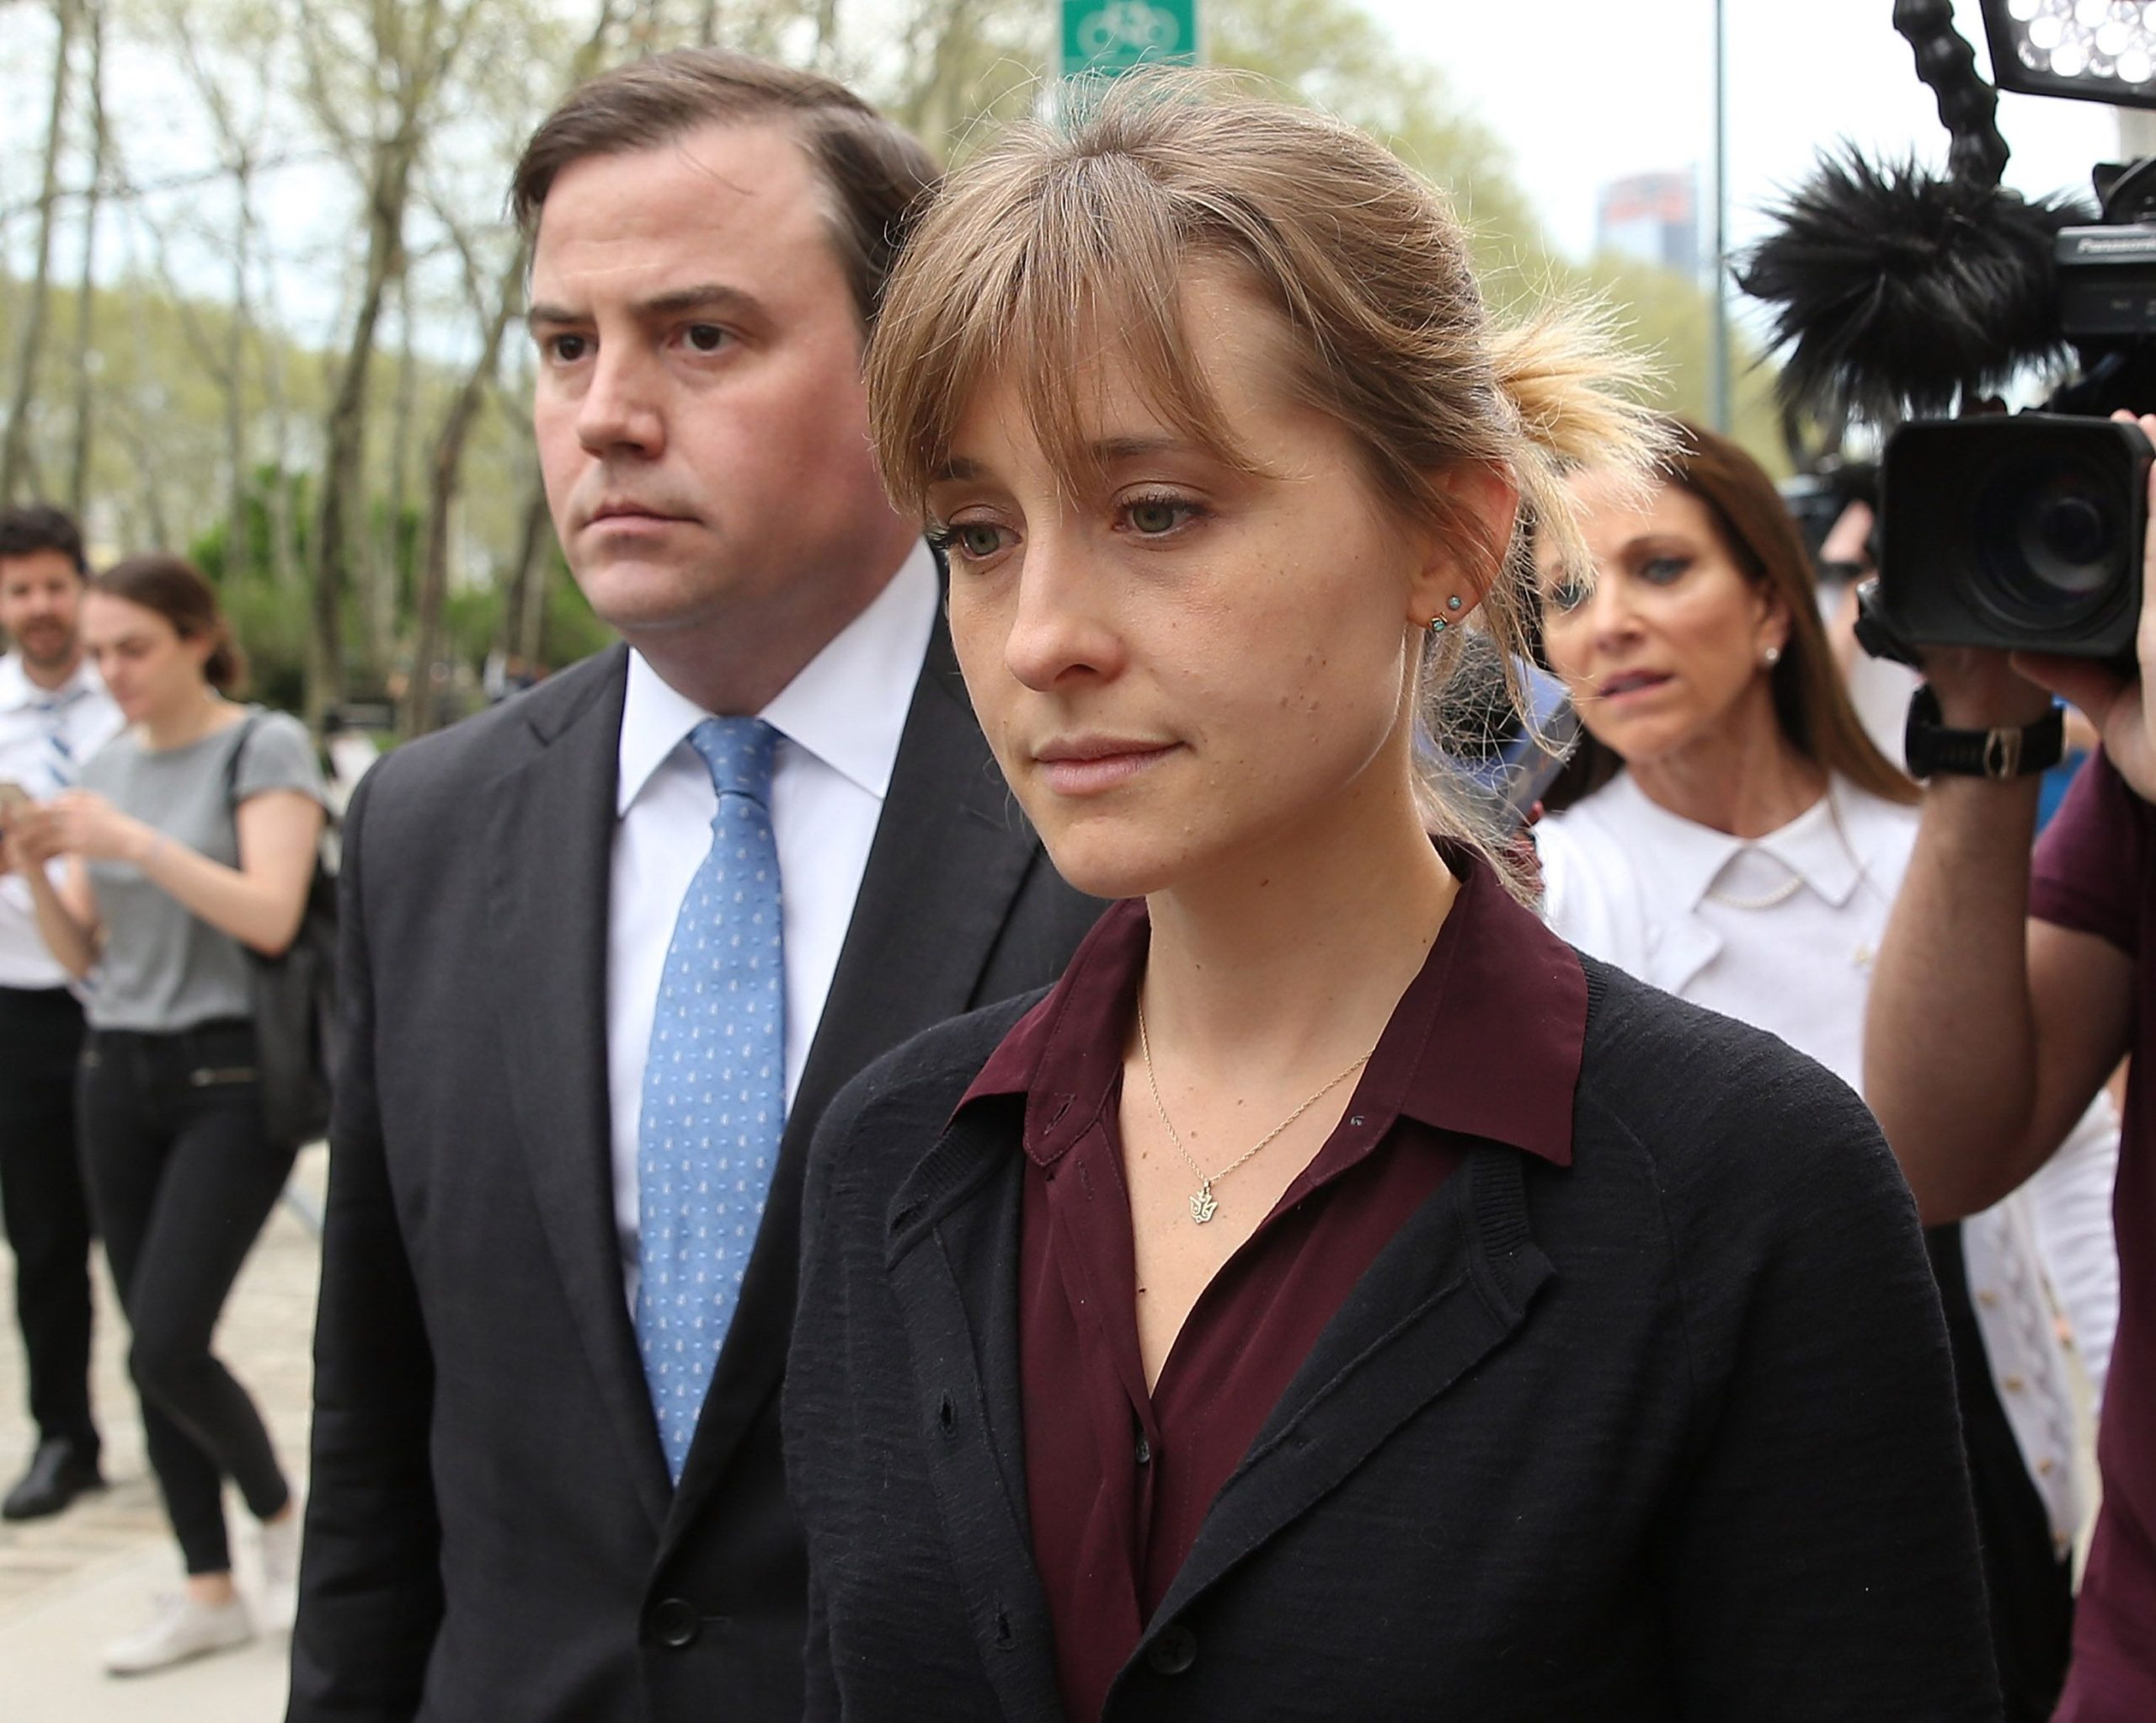 ‘Smallville’ Actress Allison Mack Sentenced To 3 Years In Prison For NXIVM Sex Trafficking